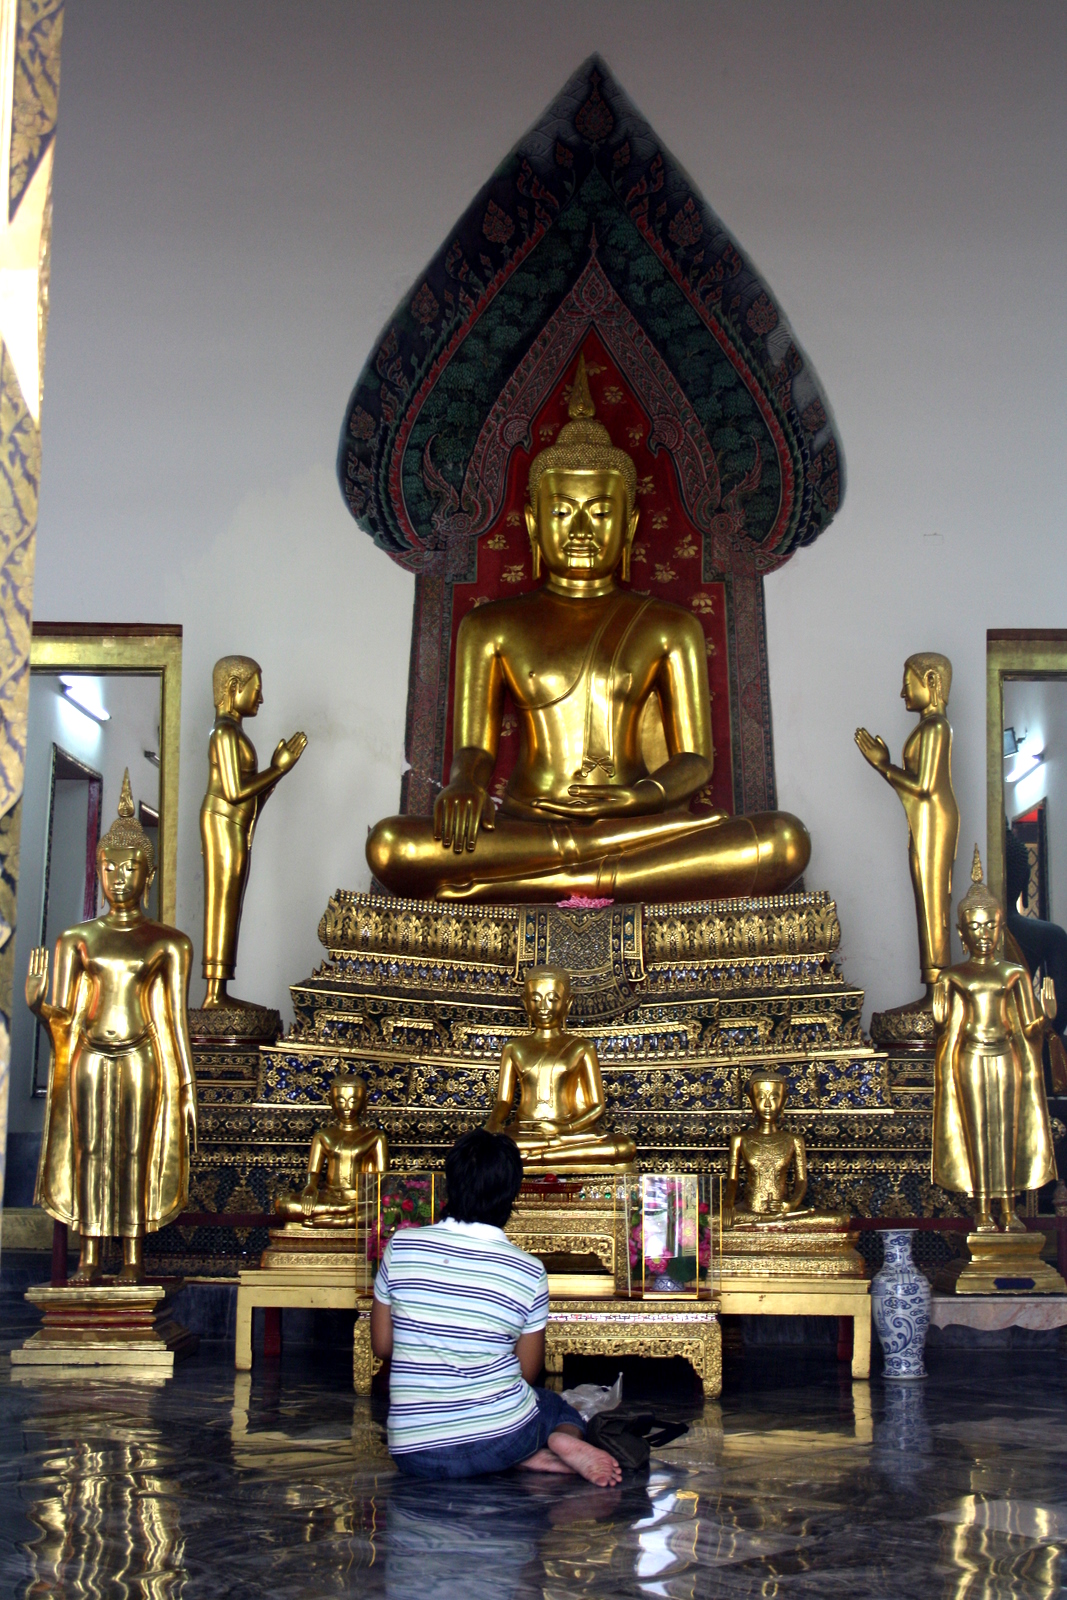 the golden buddha is sitting in front of its own statue